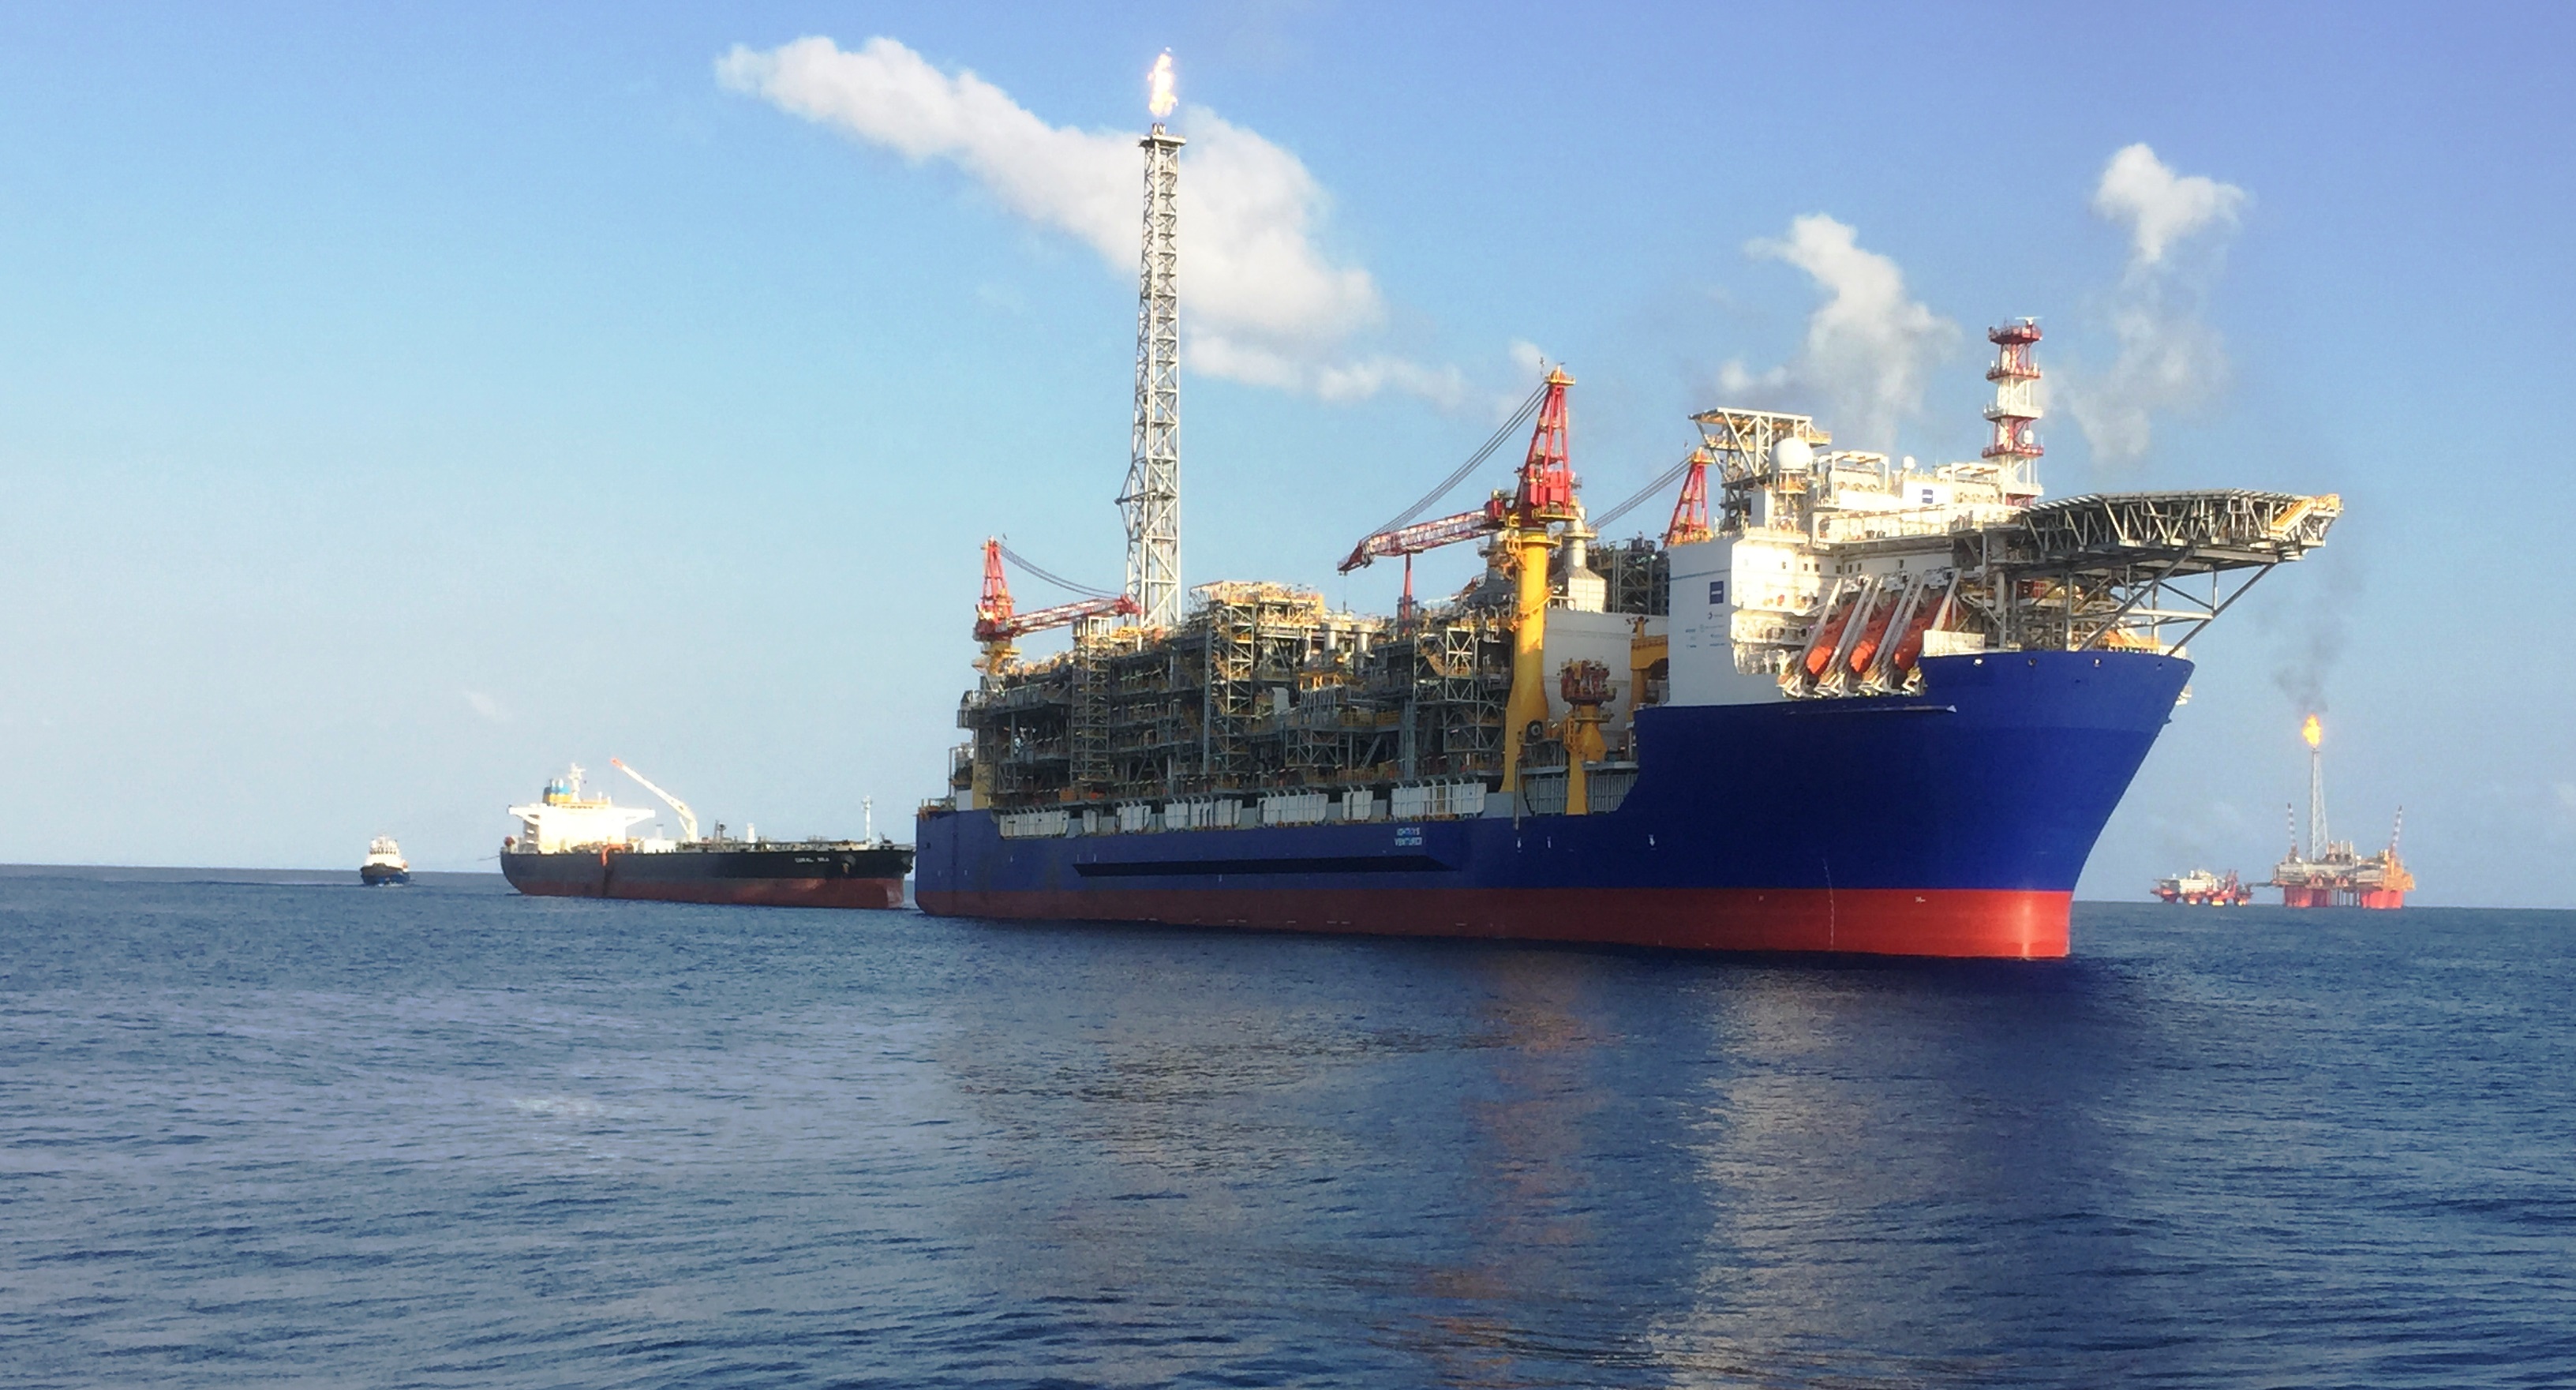 Inpex-led Inthys LNG project ships first condensate cargo